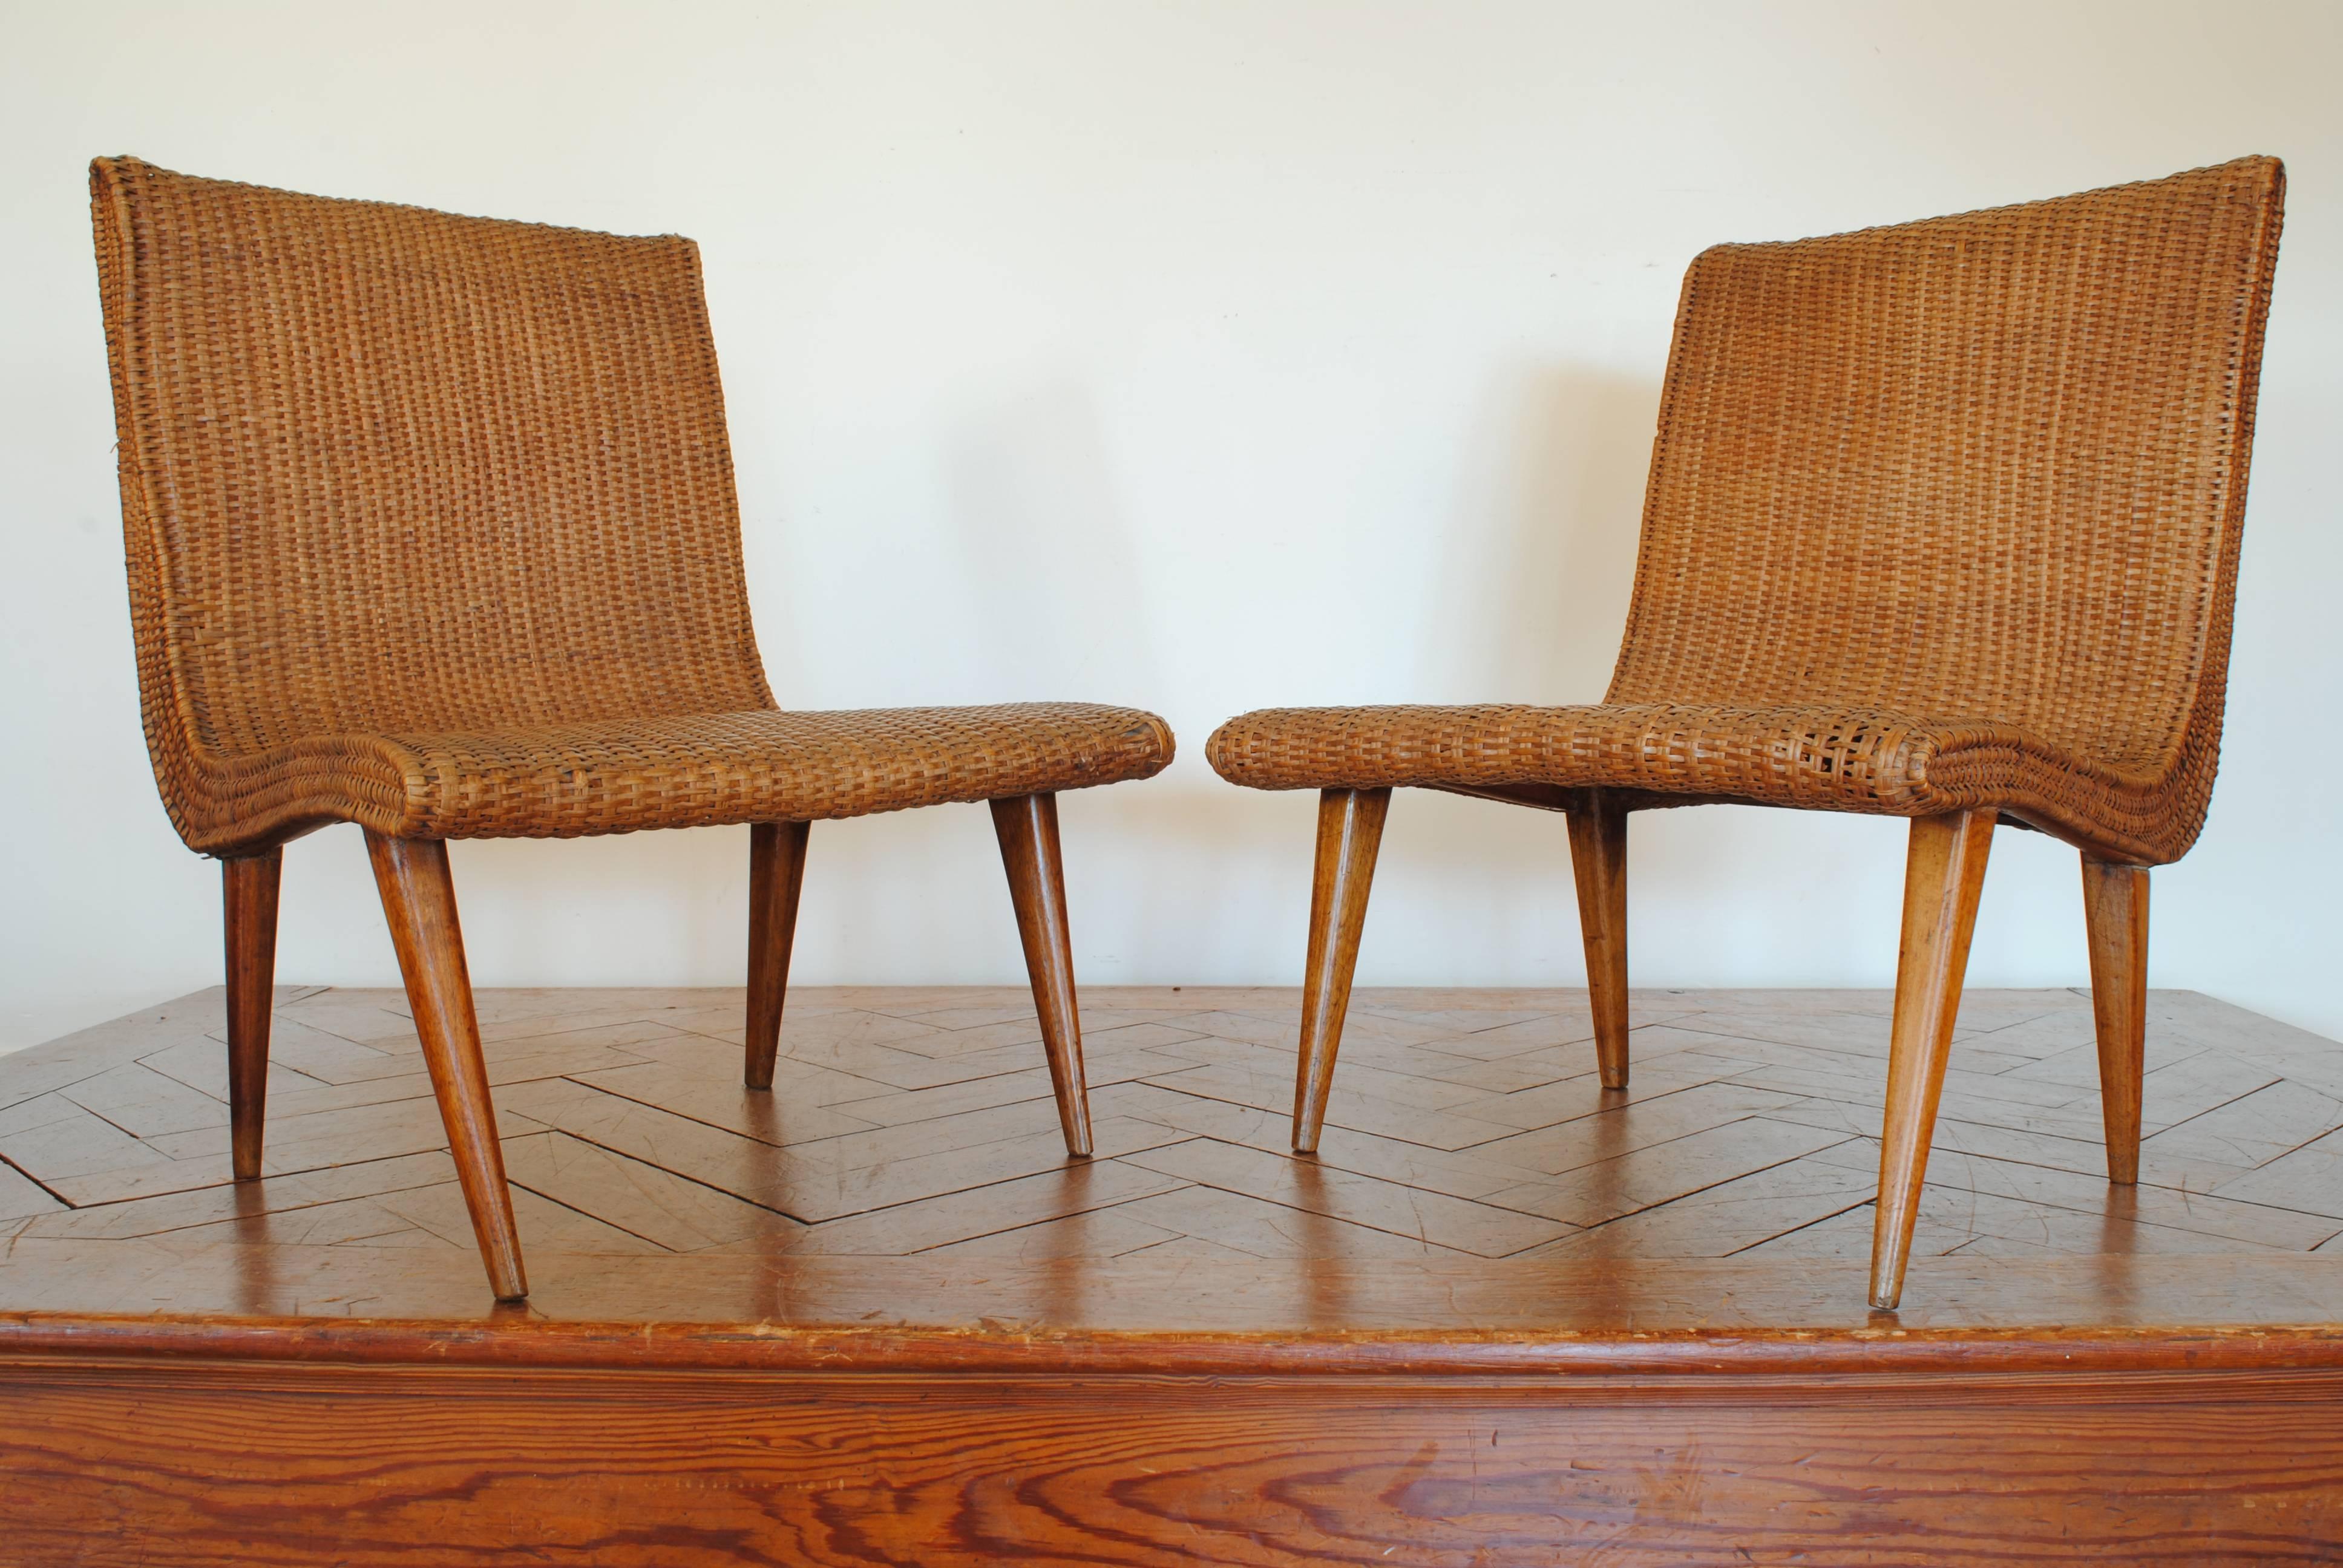 Upholstered in original rattan and raised on four tapering legs, second half of the 20th century.